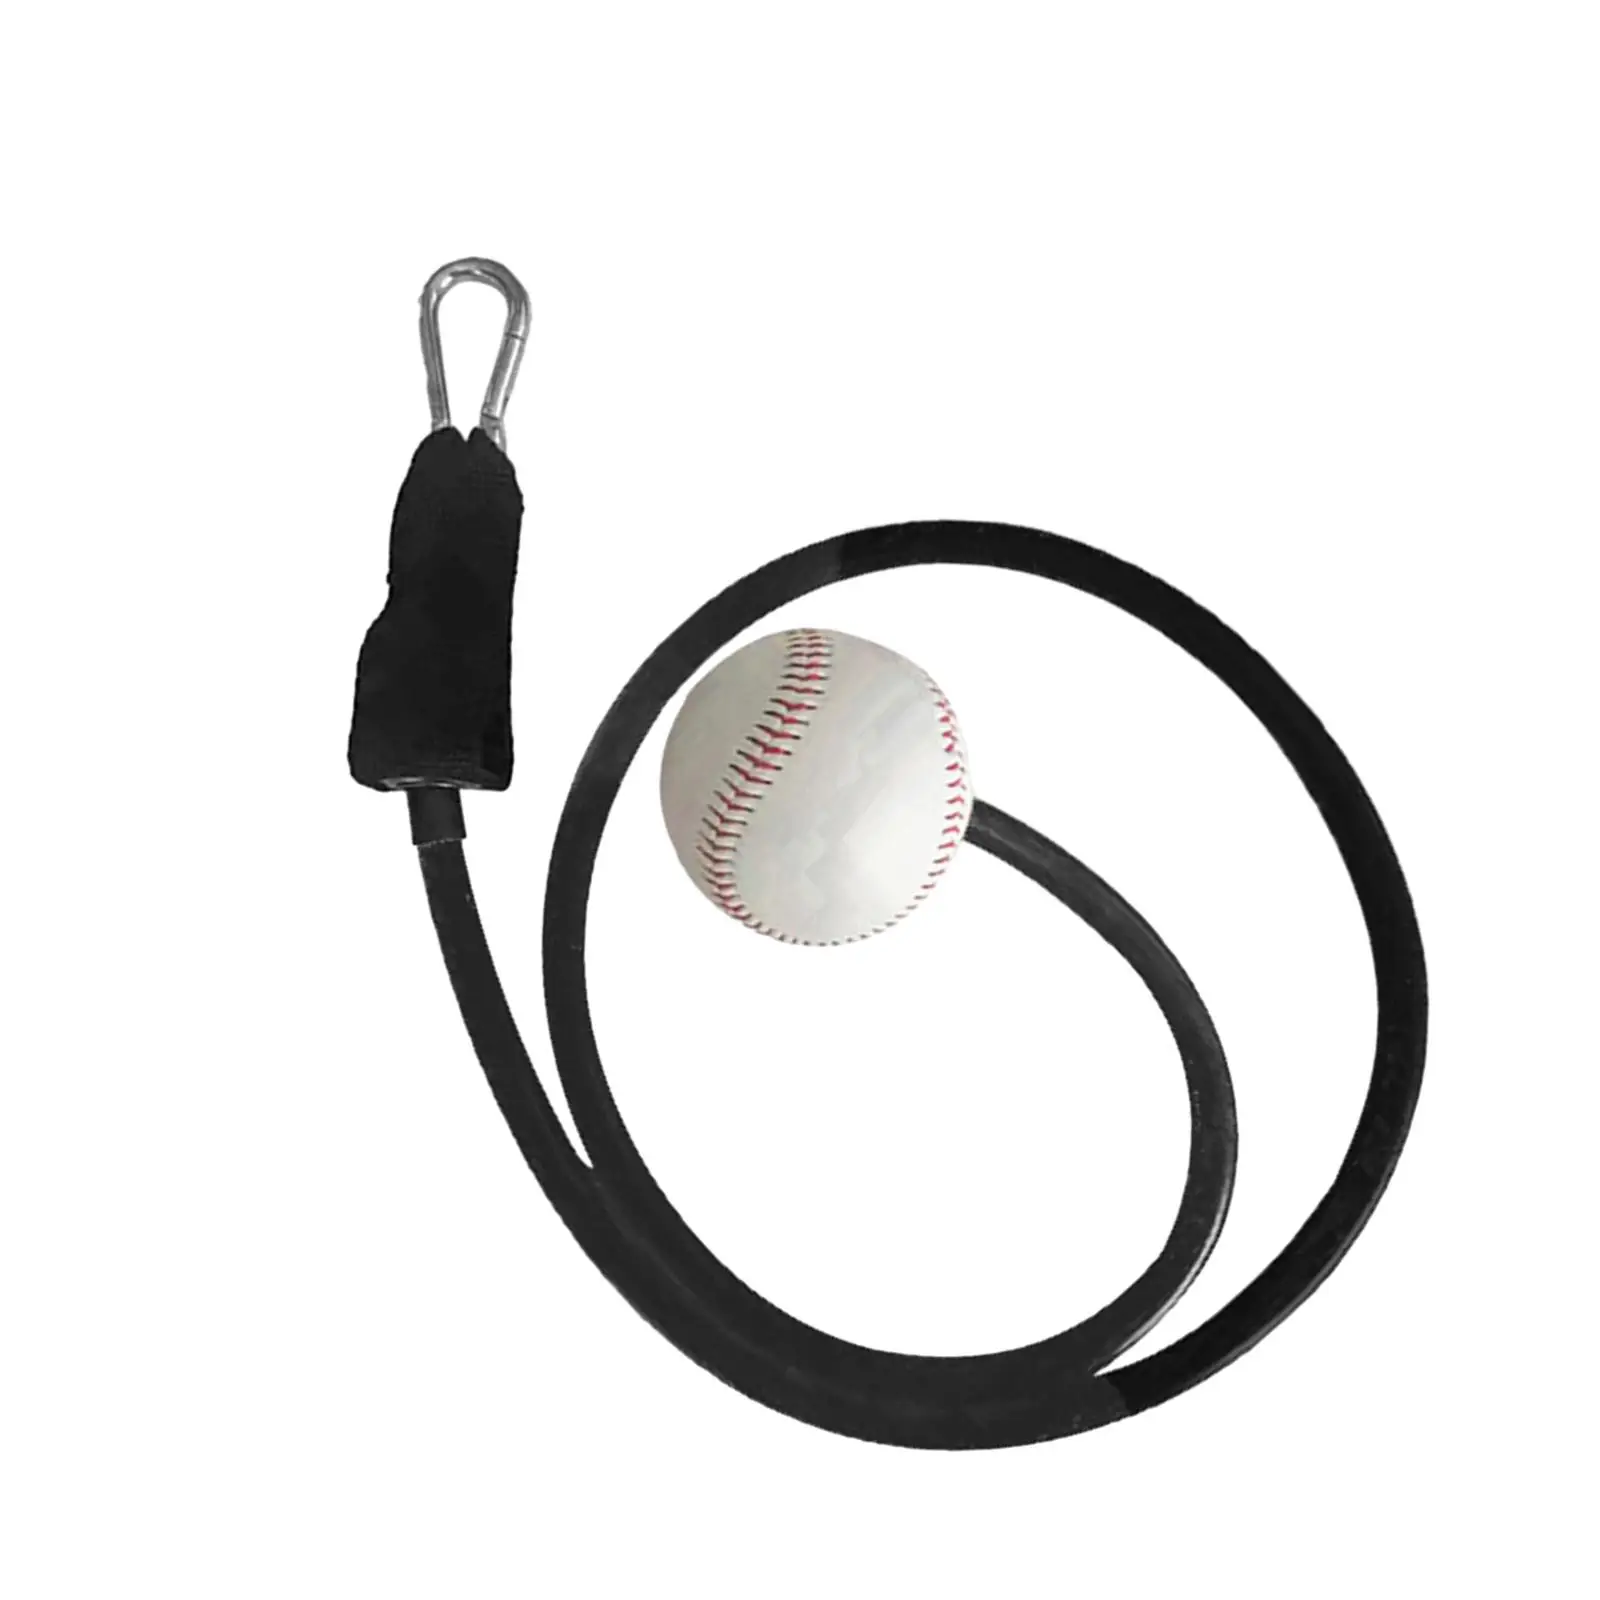 Baseball Pitching Bands Baseball Throwing Trainer Resistance Bands Outdoor Baseball Exercise Band for Kids Adults Stretching